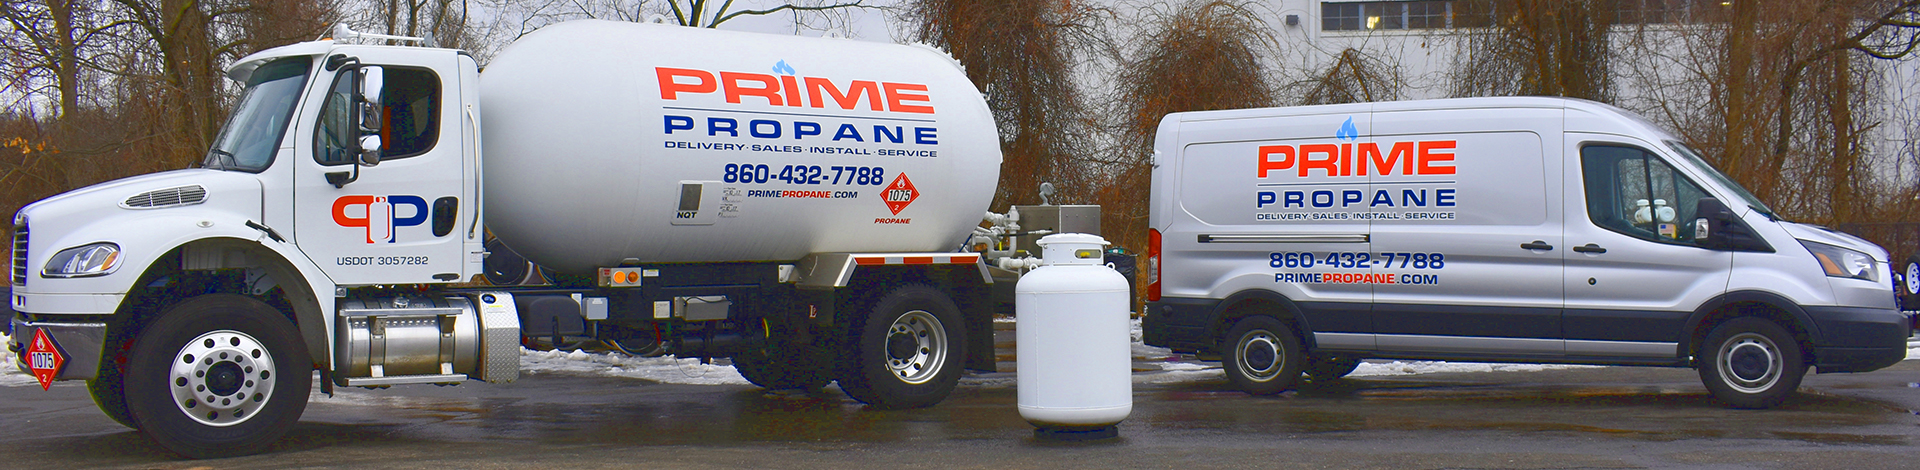 Propane delivery is our service.